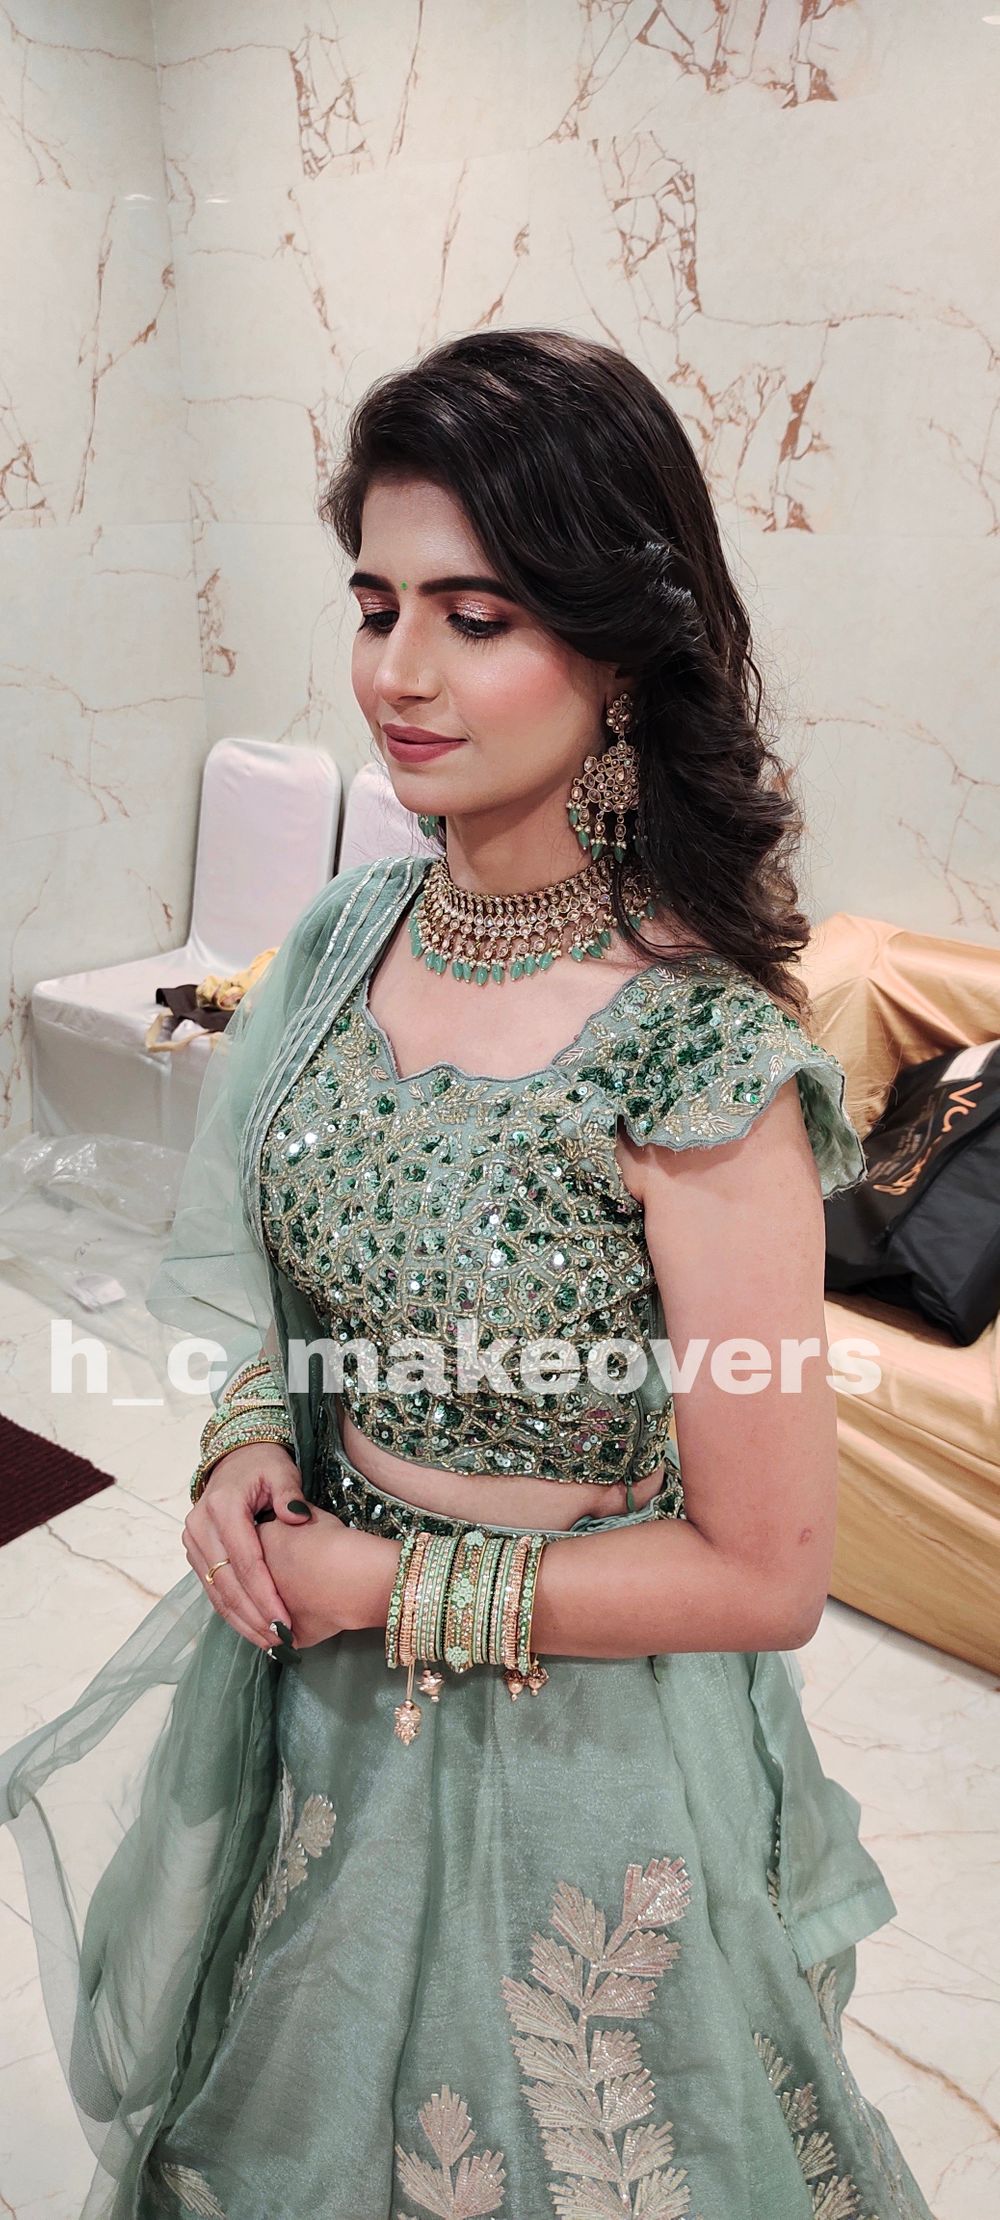 Photo From Archana - By HC Makeovers